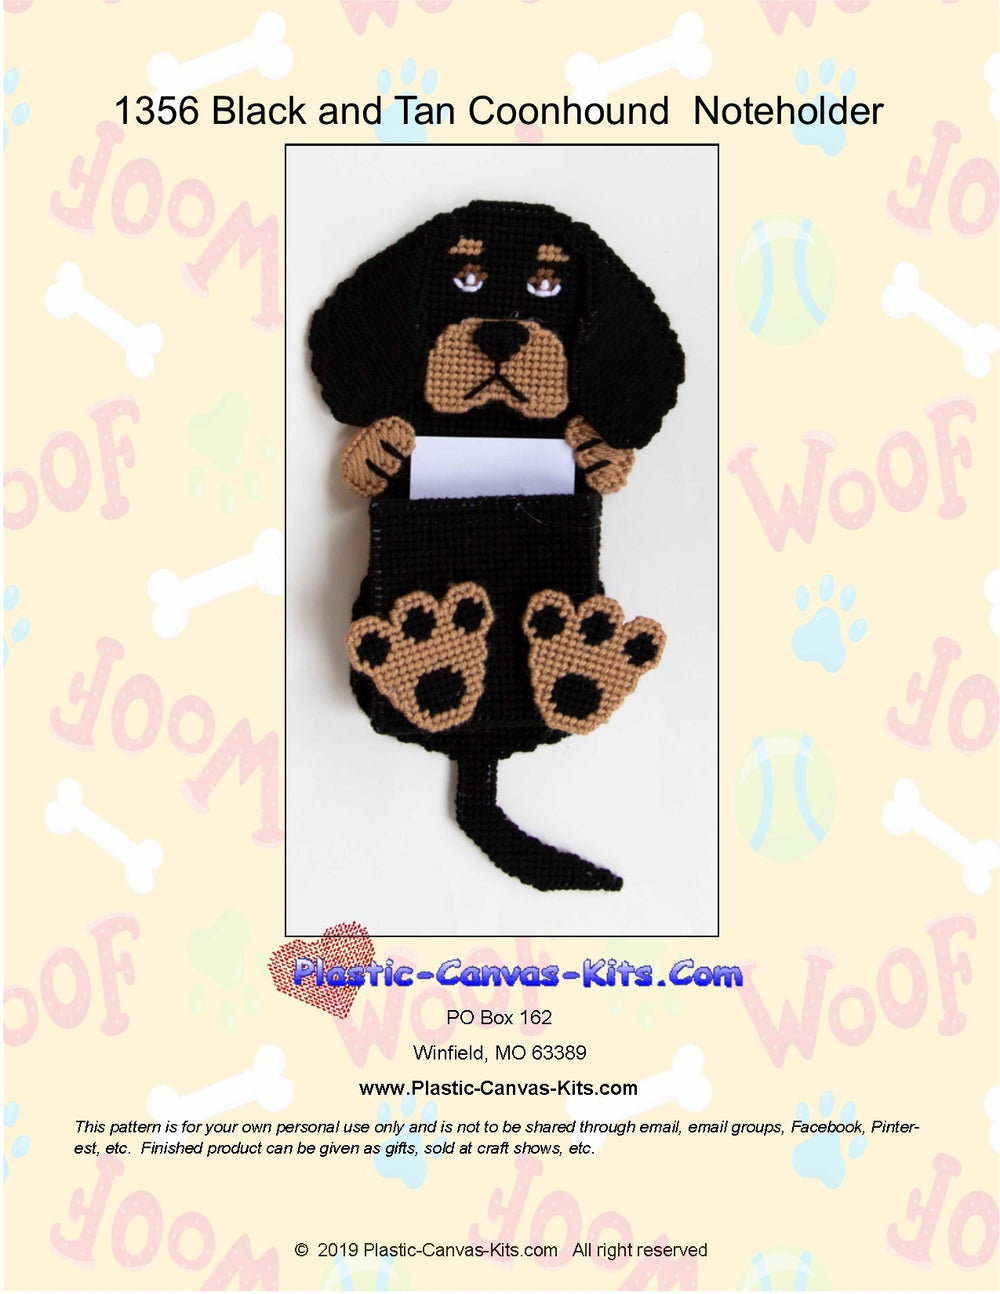 Black and Tan Coonhound Note Holder